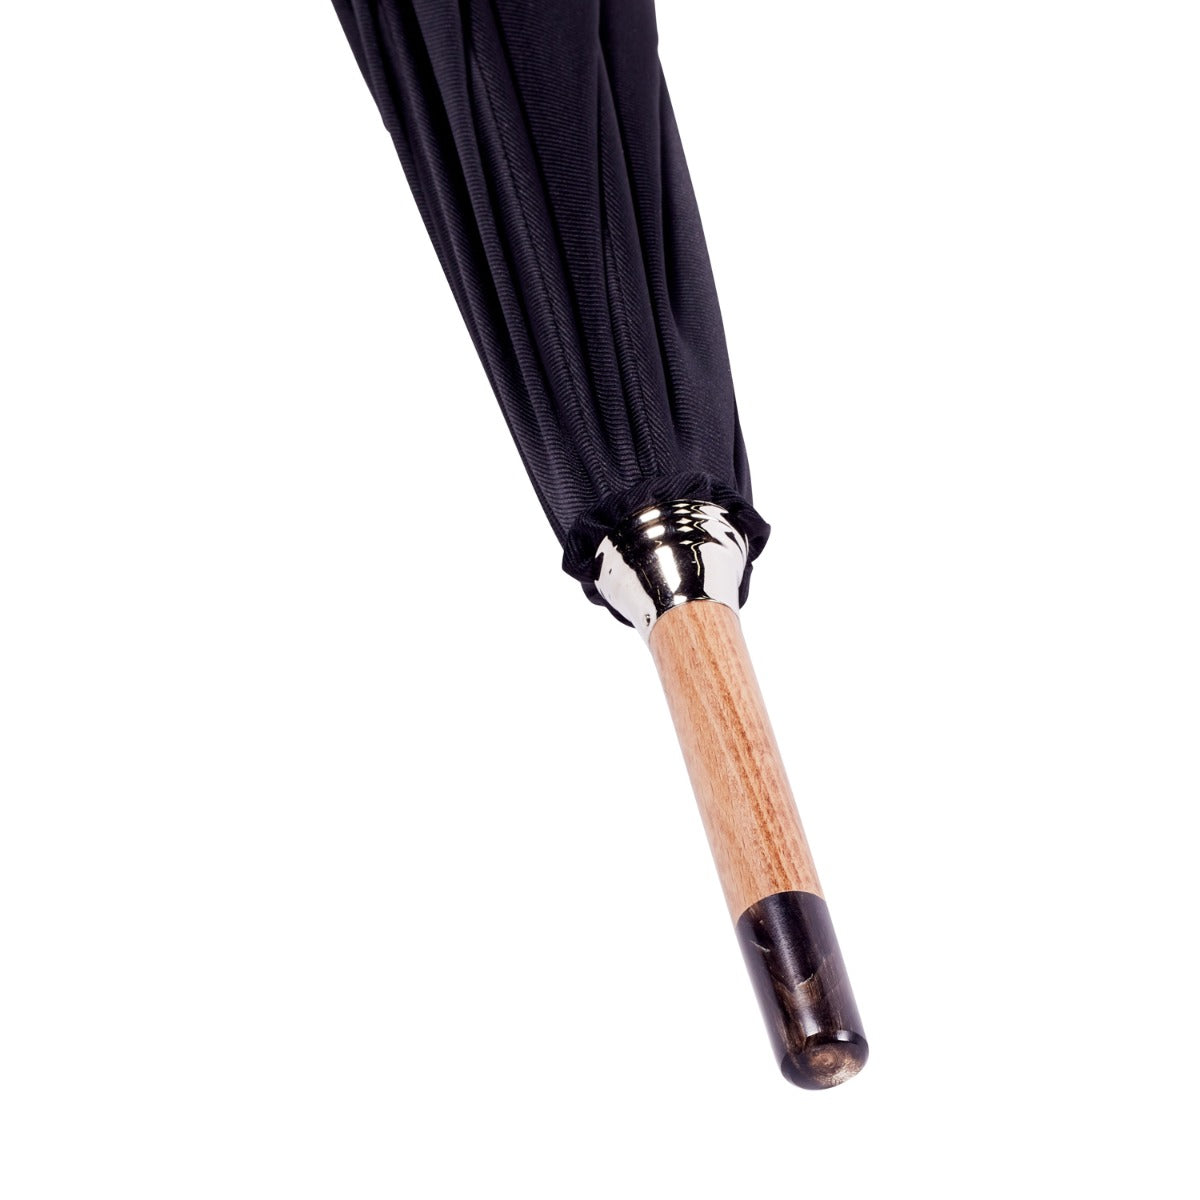 A Brown Pigskin Solid Stick Umbrella with a Black Canopy made in Italy by KirbyAllison.com.